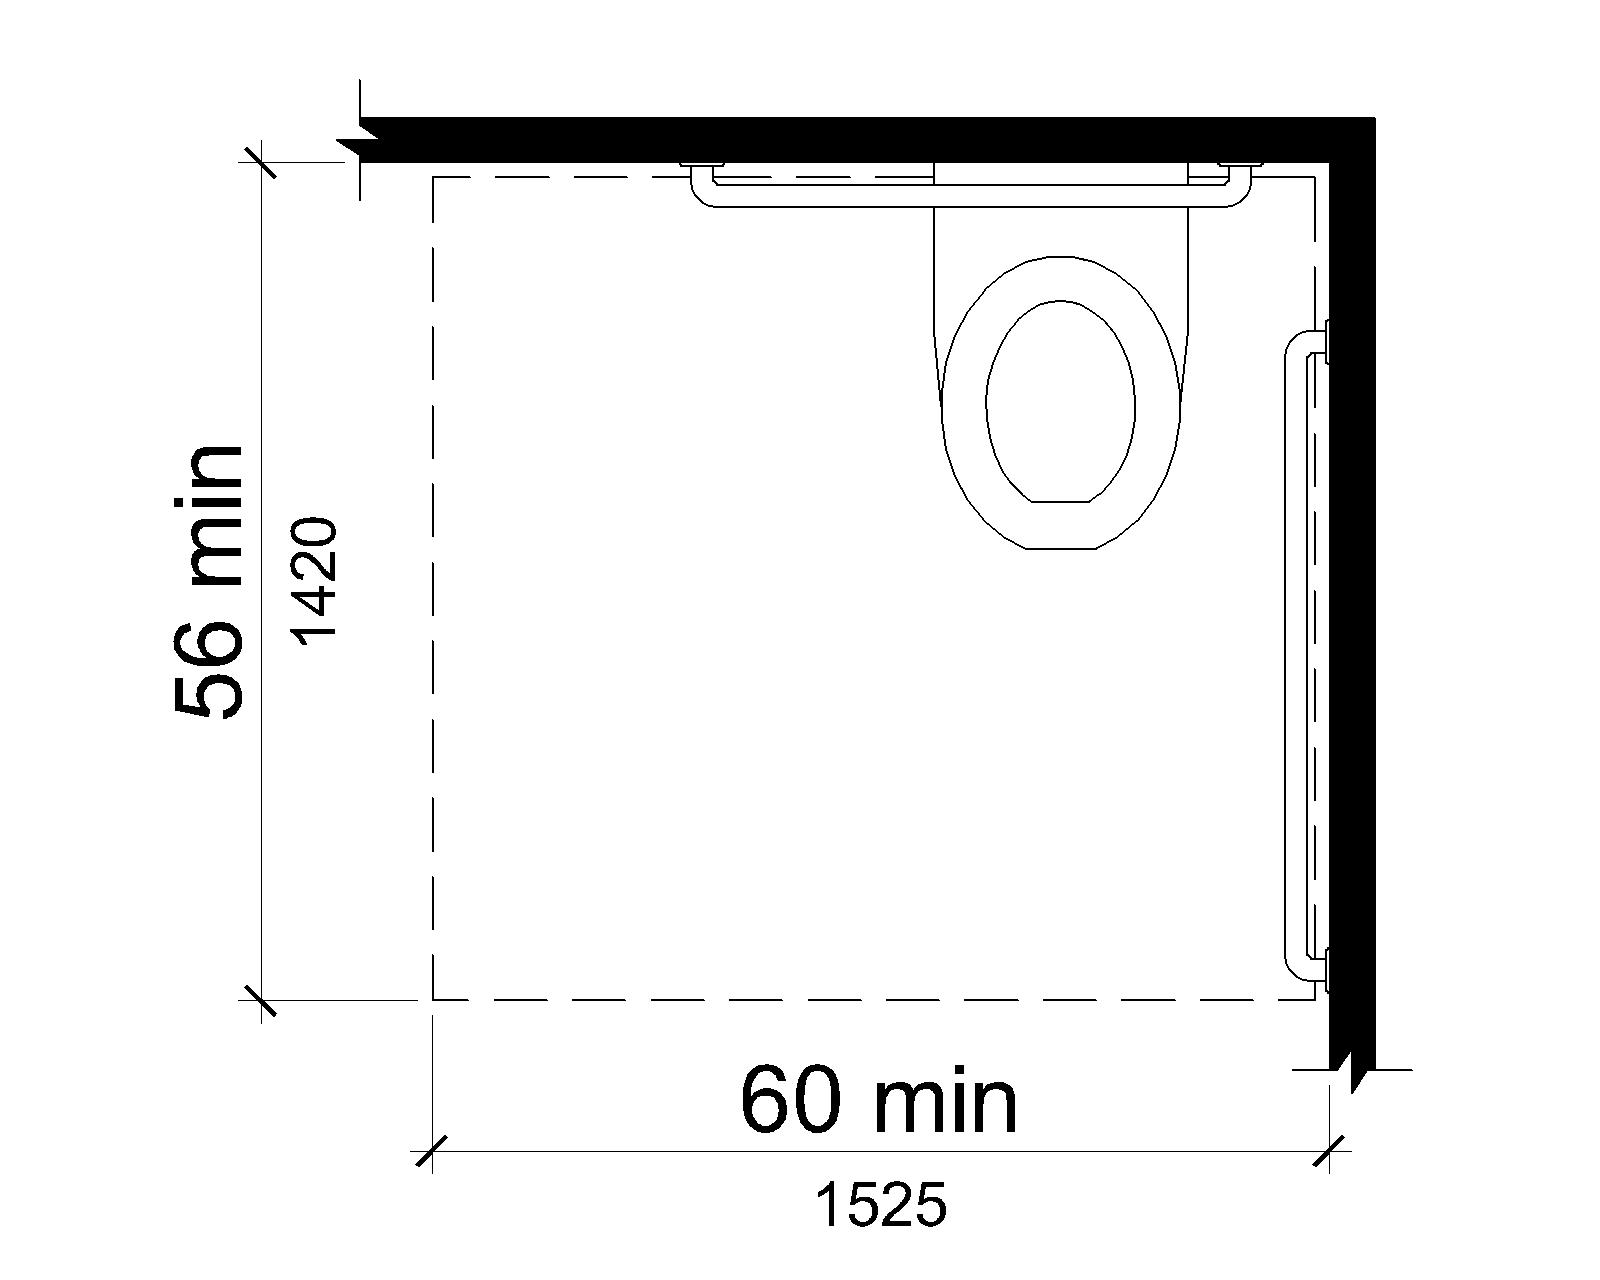 Figure V604.3.1 Clearance Around Water Closet. The clearance around a water closet is shown in plan view to be 60 inches (1525 mm) wide minimum and 56 inches (1420 mm) deep minimum.